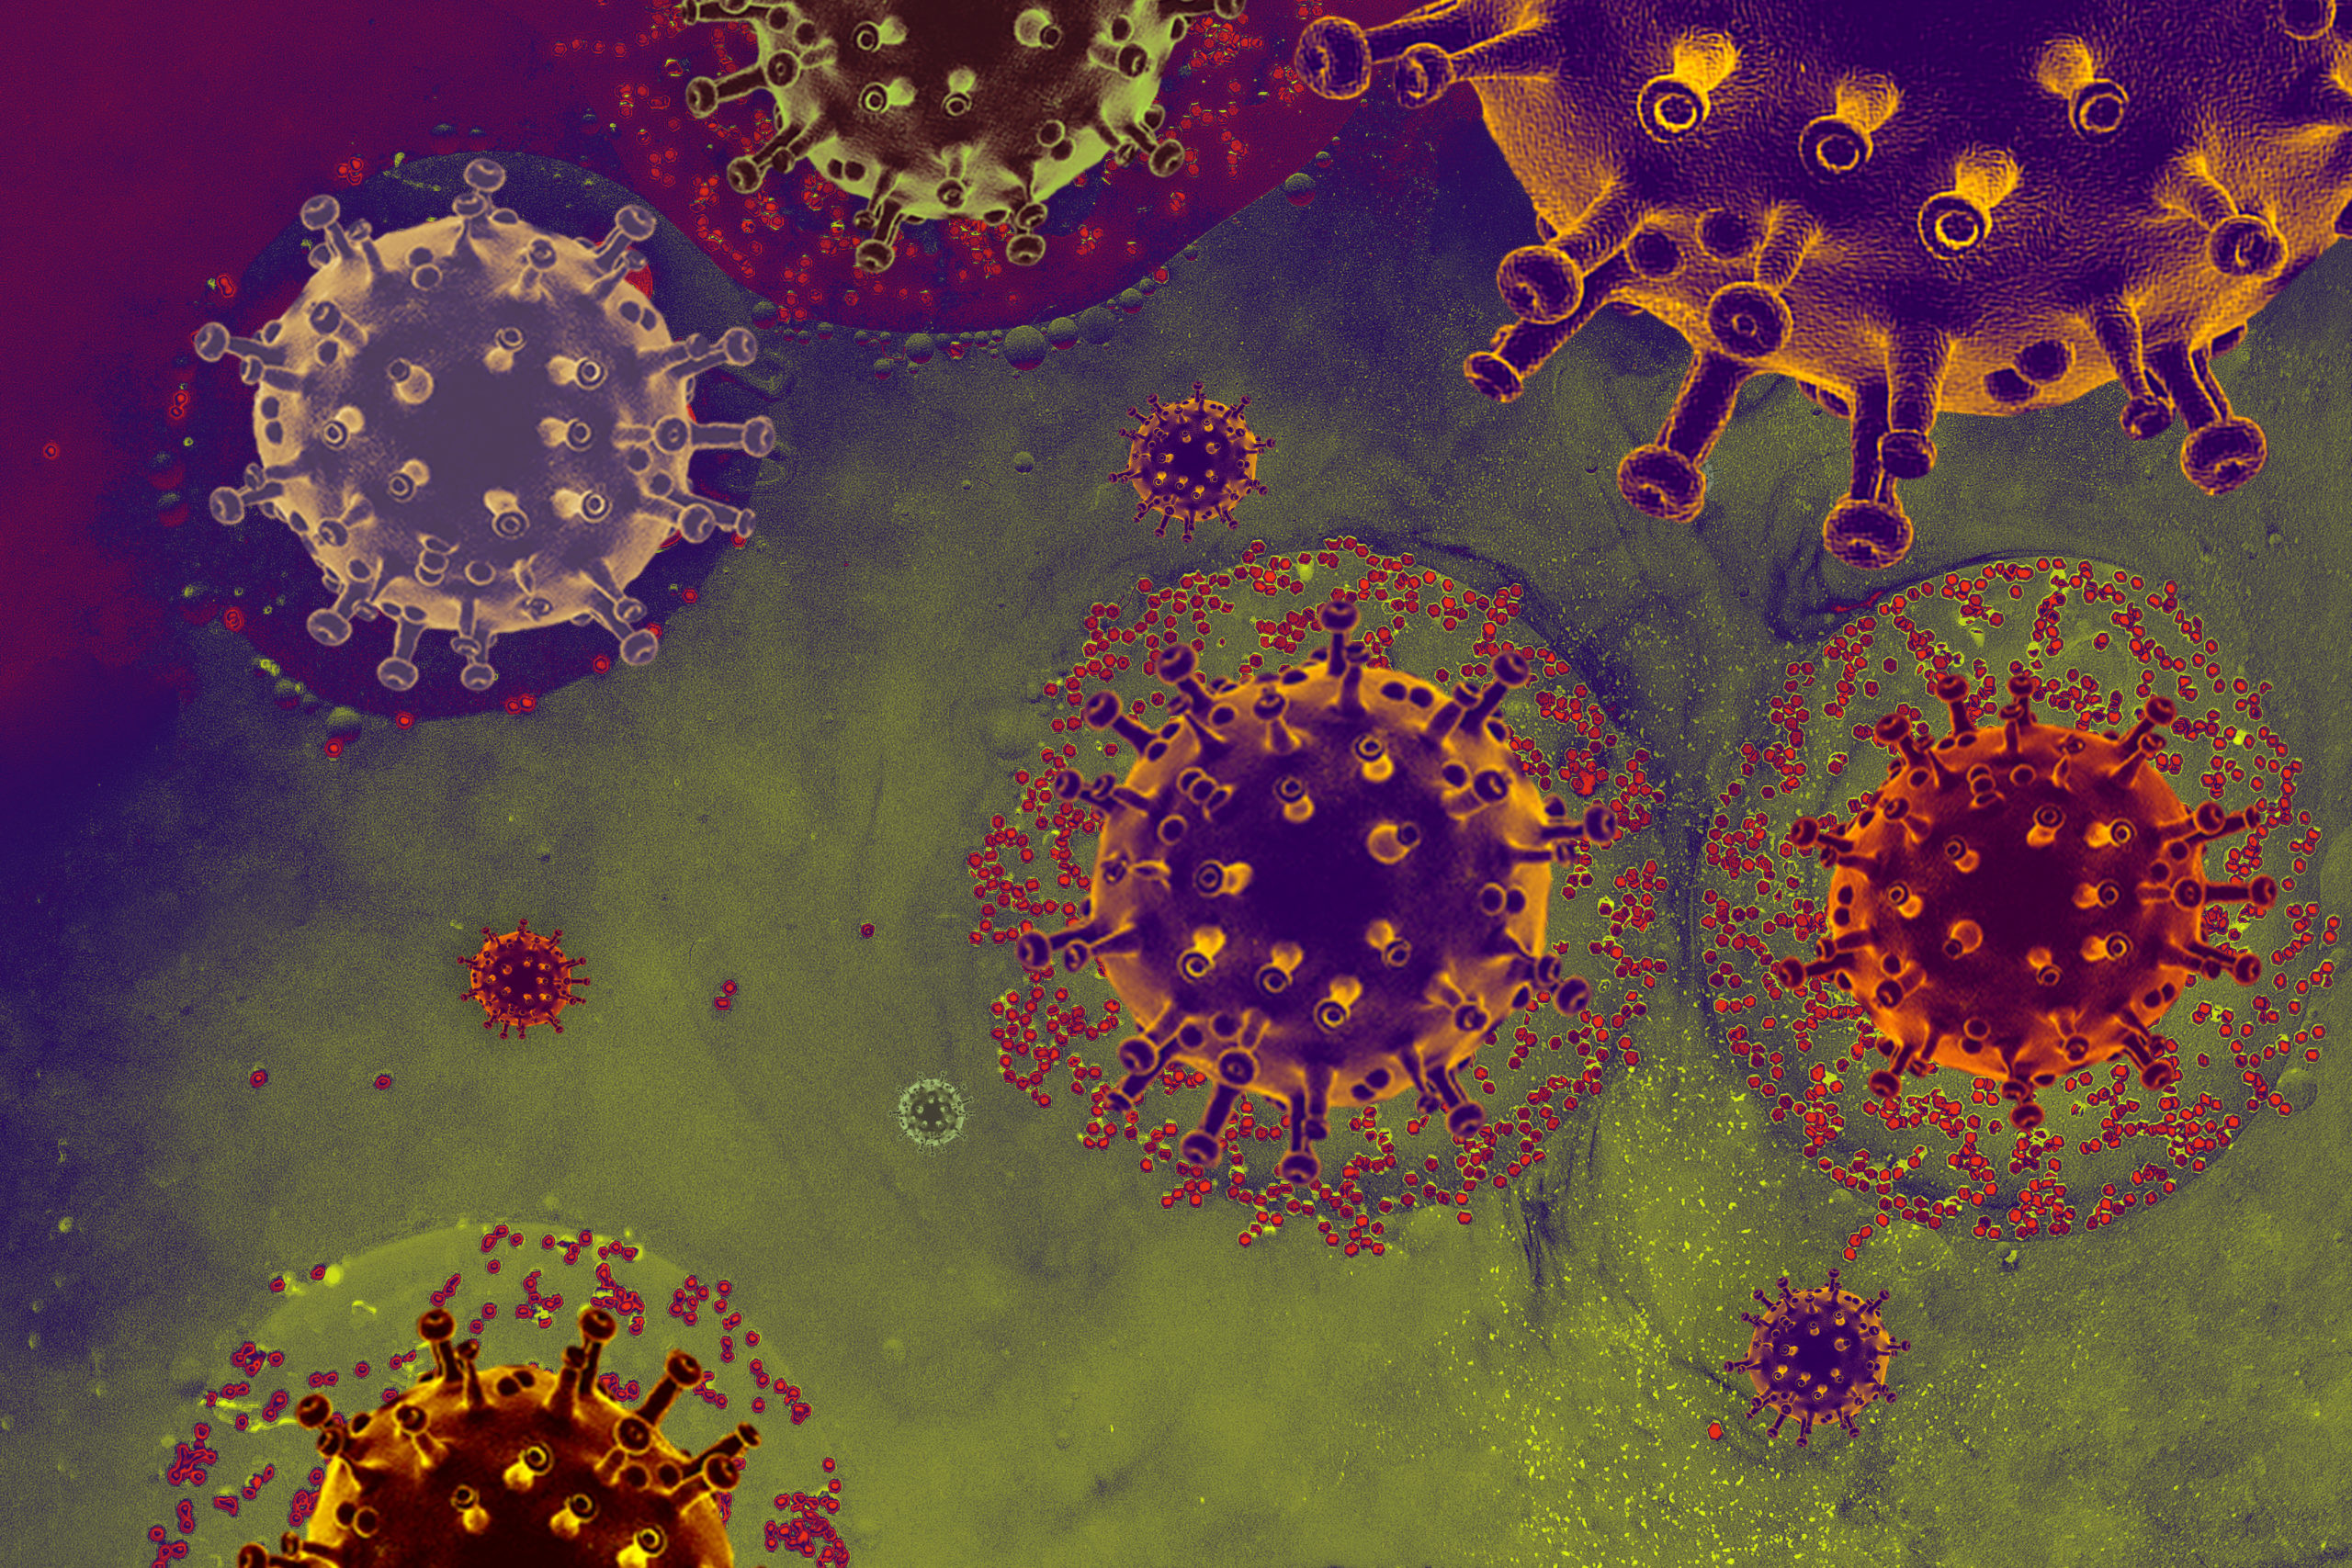 Virus pandemic cells or bacteria molecule concept. Germs, bacteria, cell infected organism.